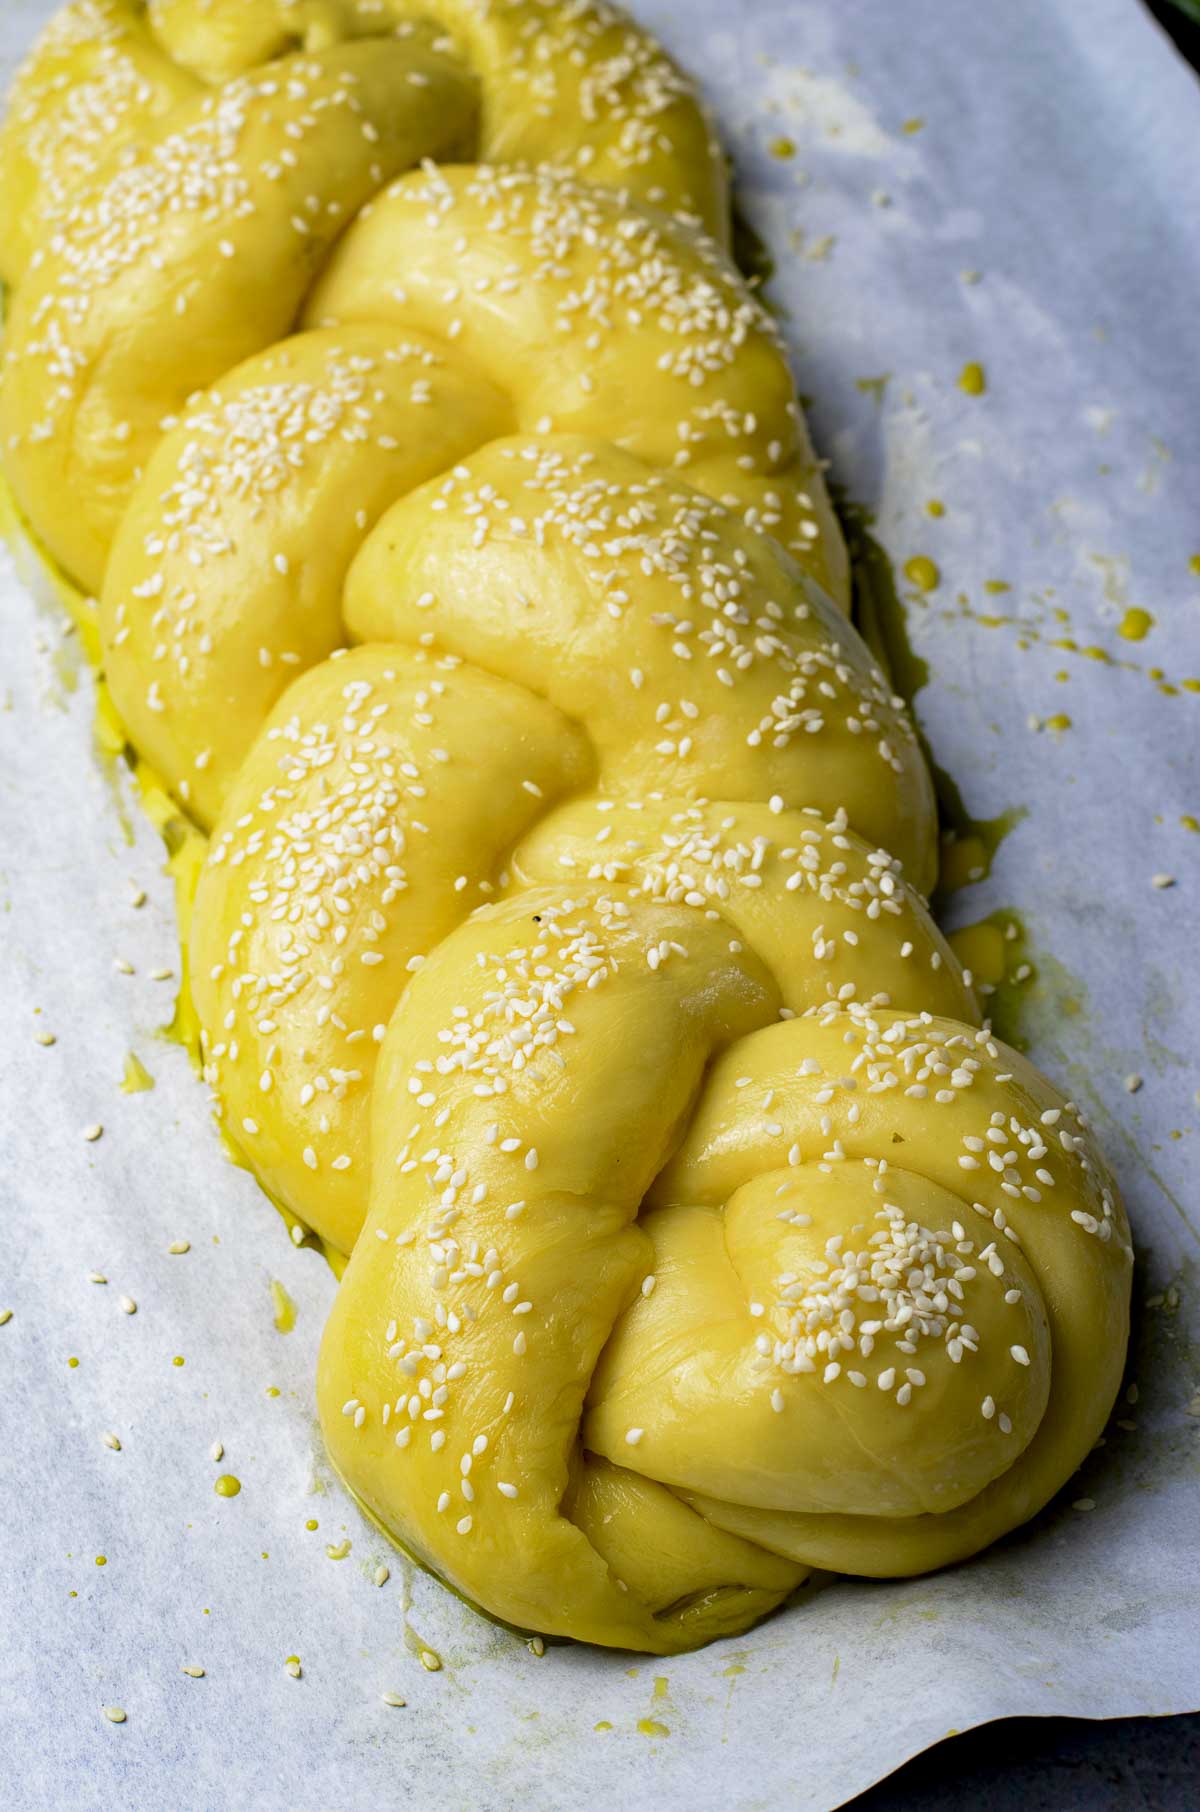 Challah bread dough braided and sprinkled with sesame seeds.